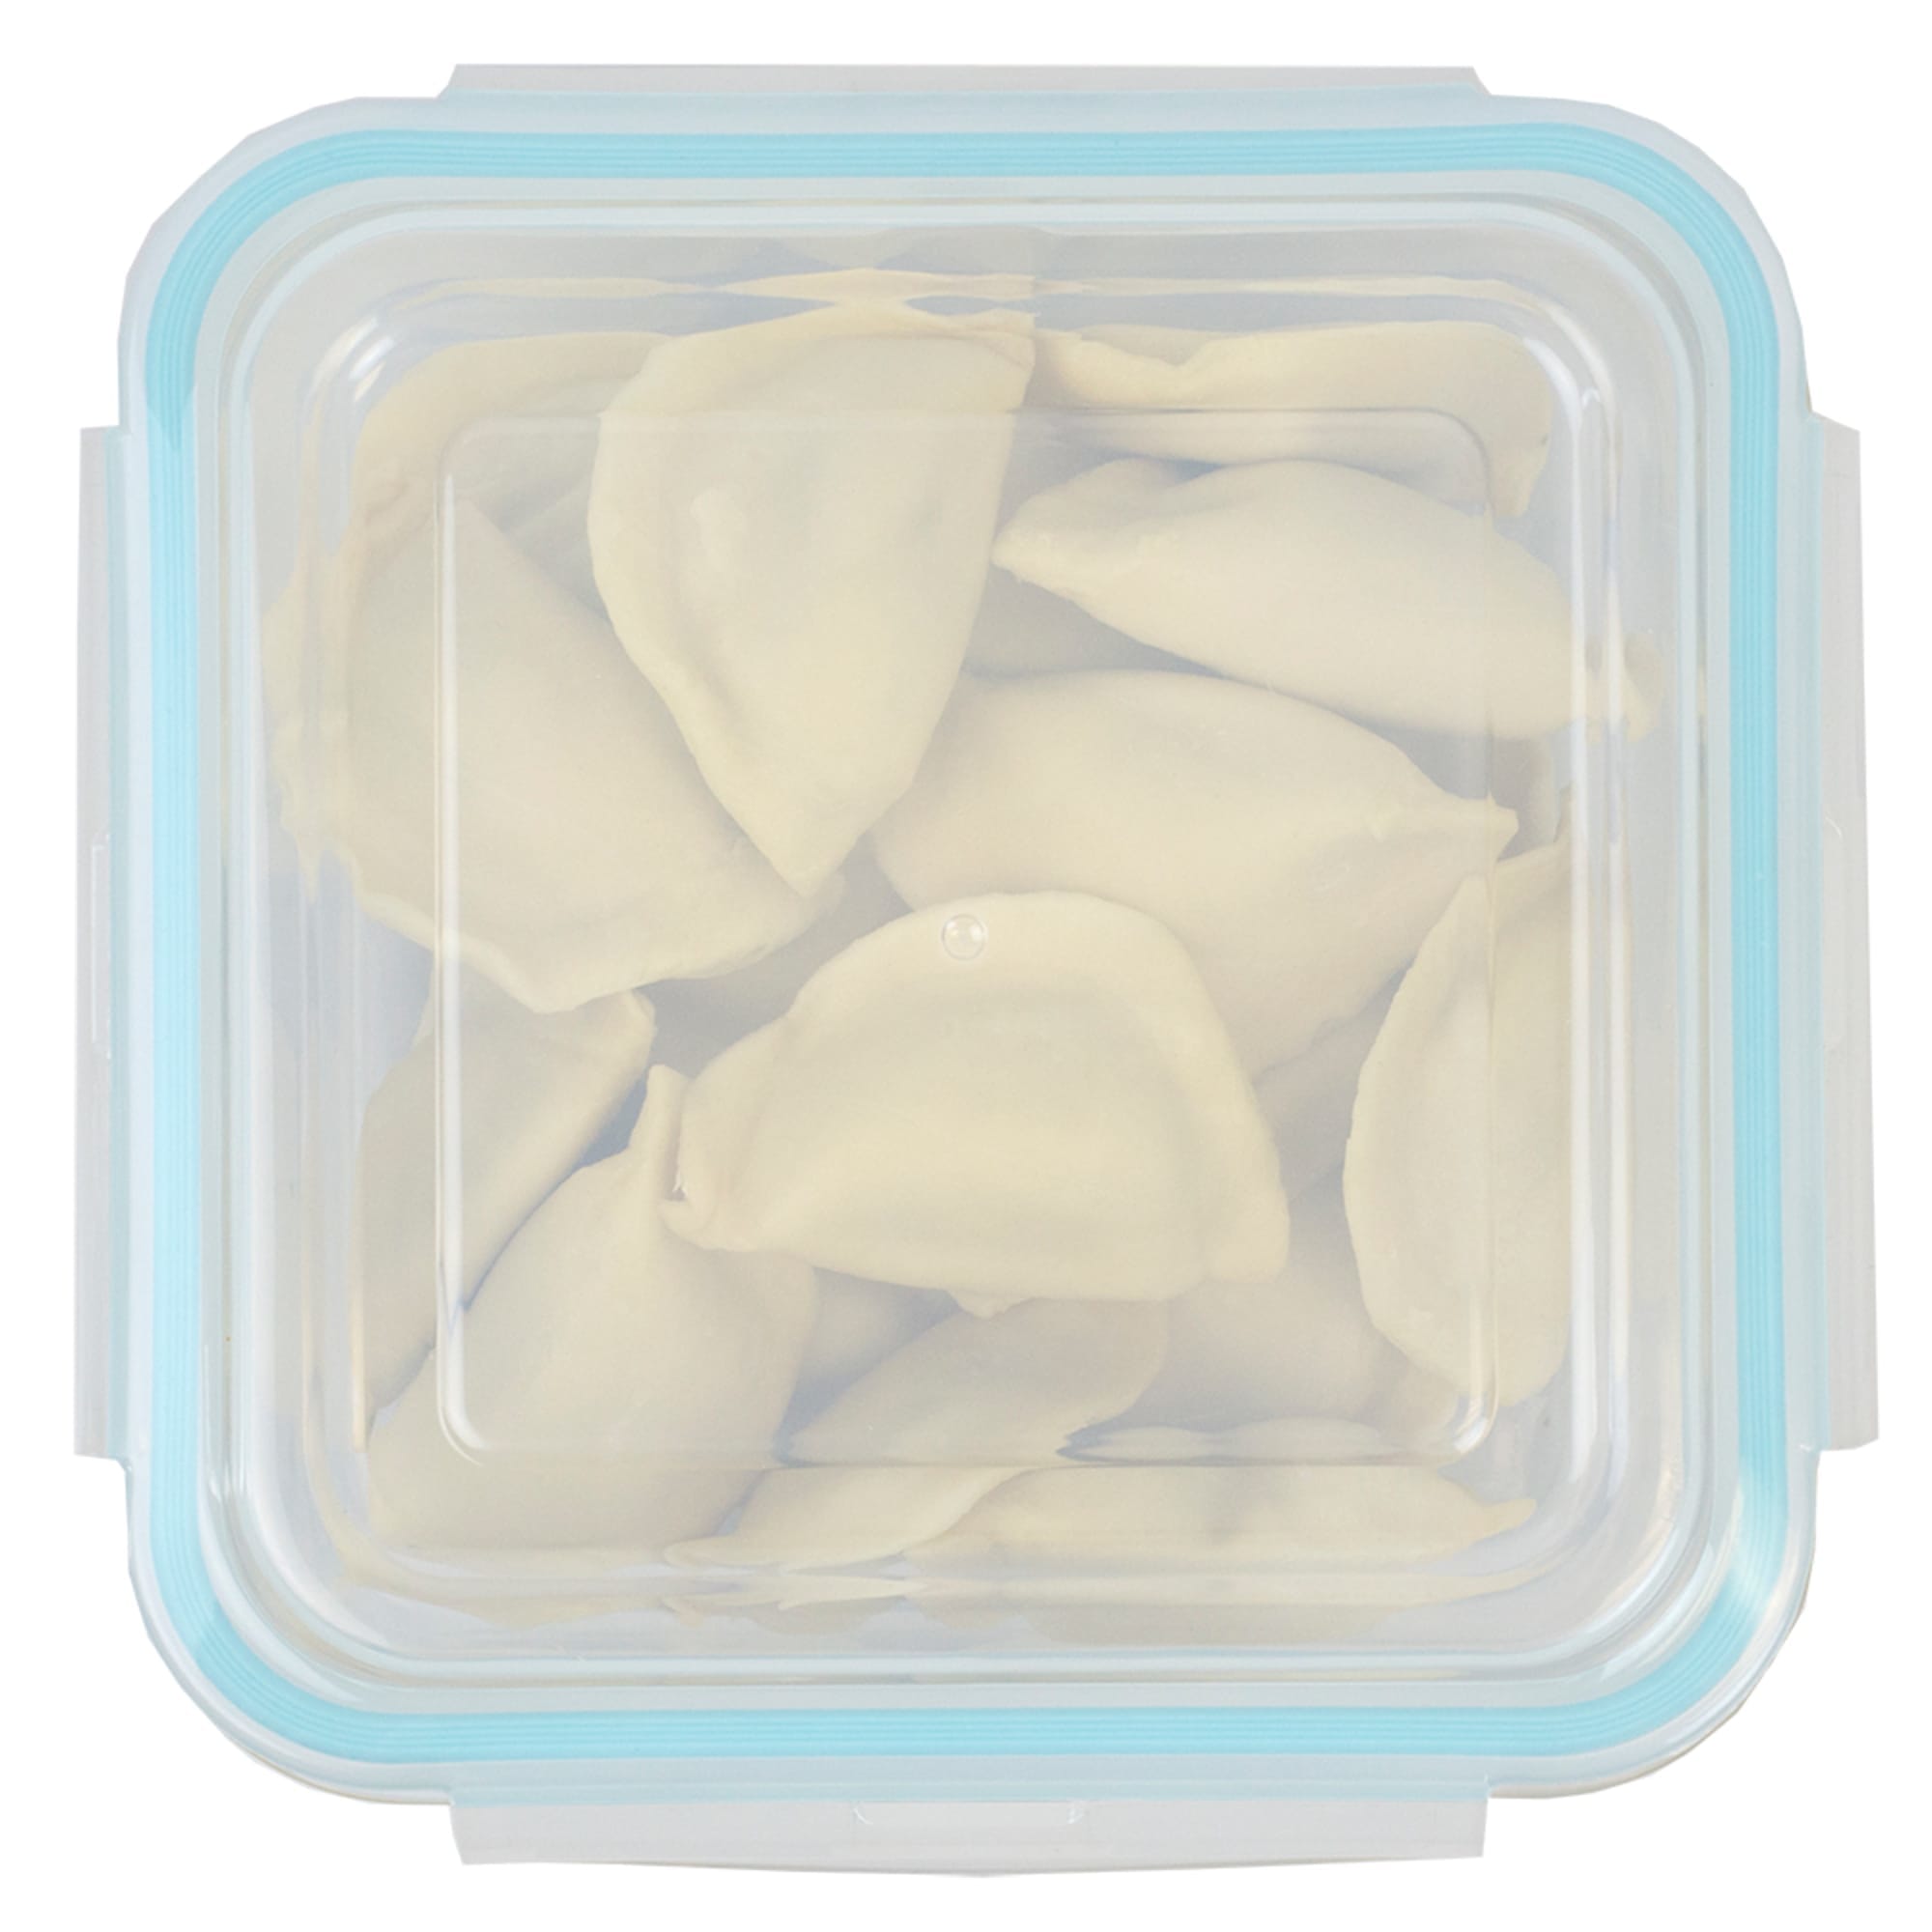 Home Basics 74 oz. Square Borosilicate Glass Food Storage Container with Leak-Proof and Air-Tight Plastic Locking Lid $8.00 EACH, CASE PACK OF 12